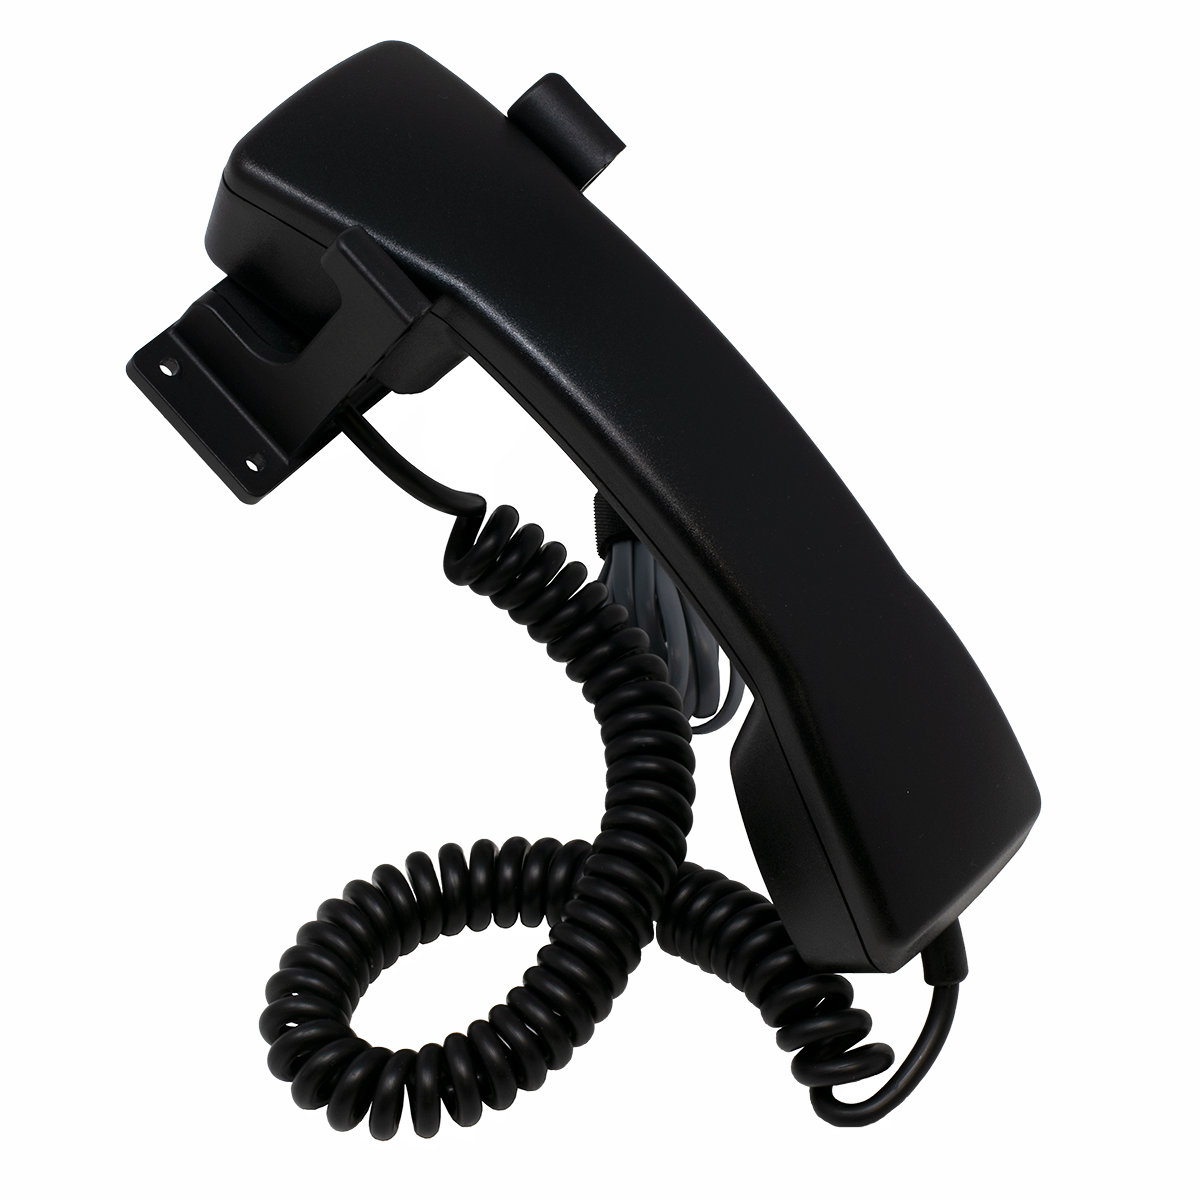 Compact No-dial Wall Phone (Side View)